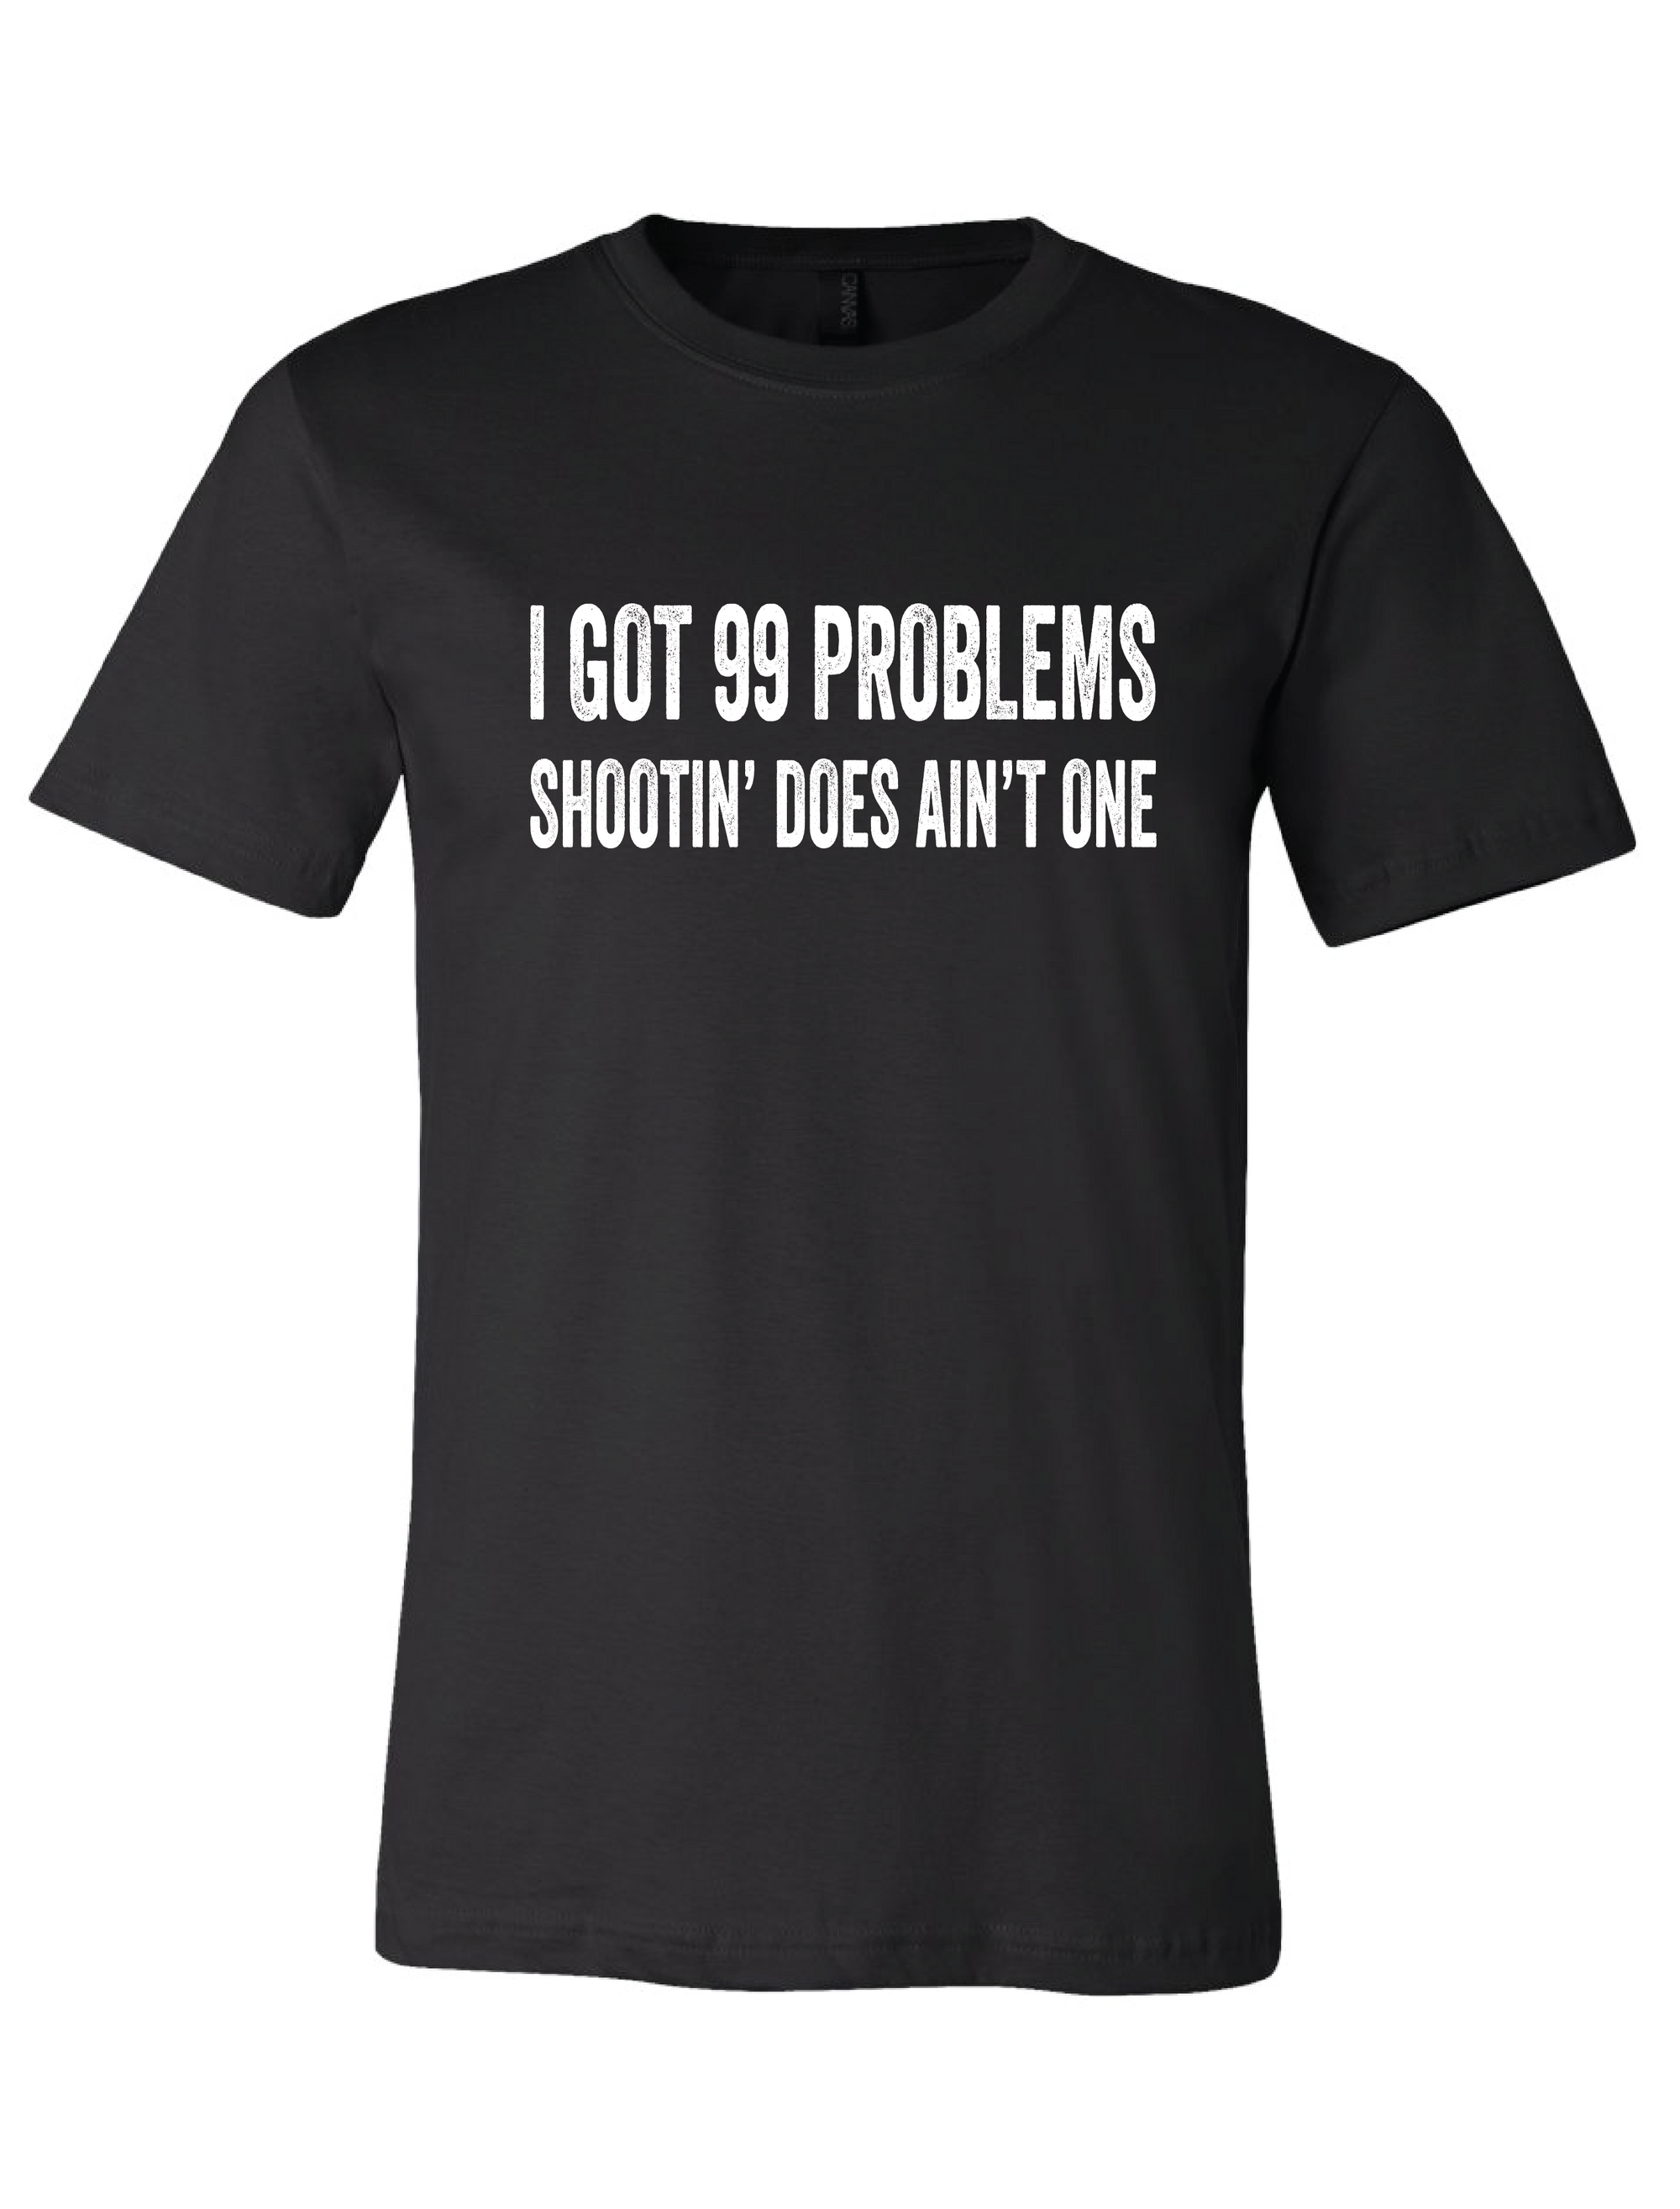 Youth 99 Problems Tee